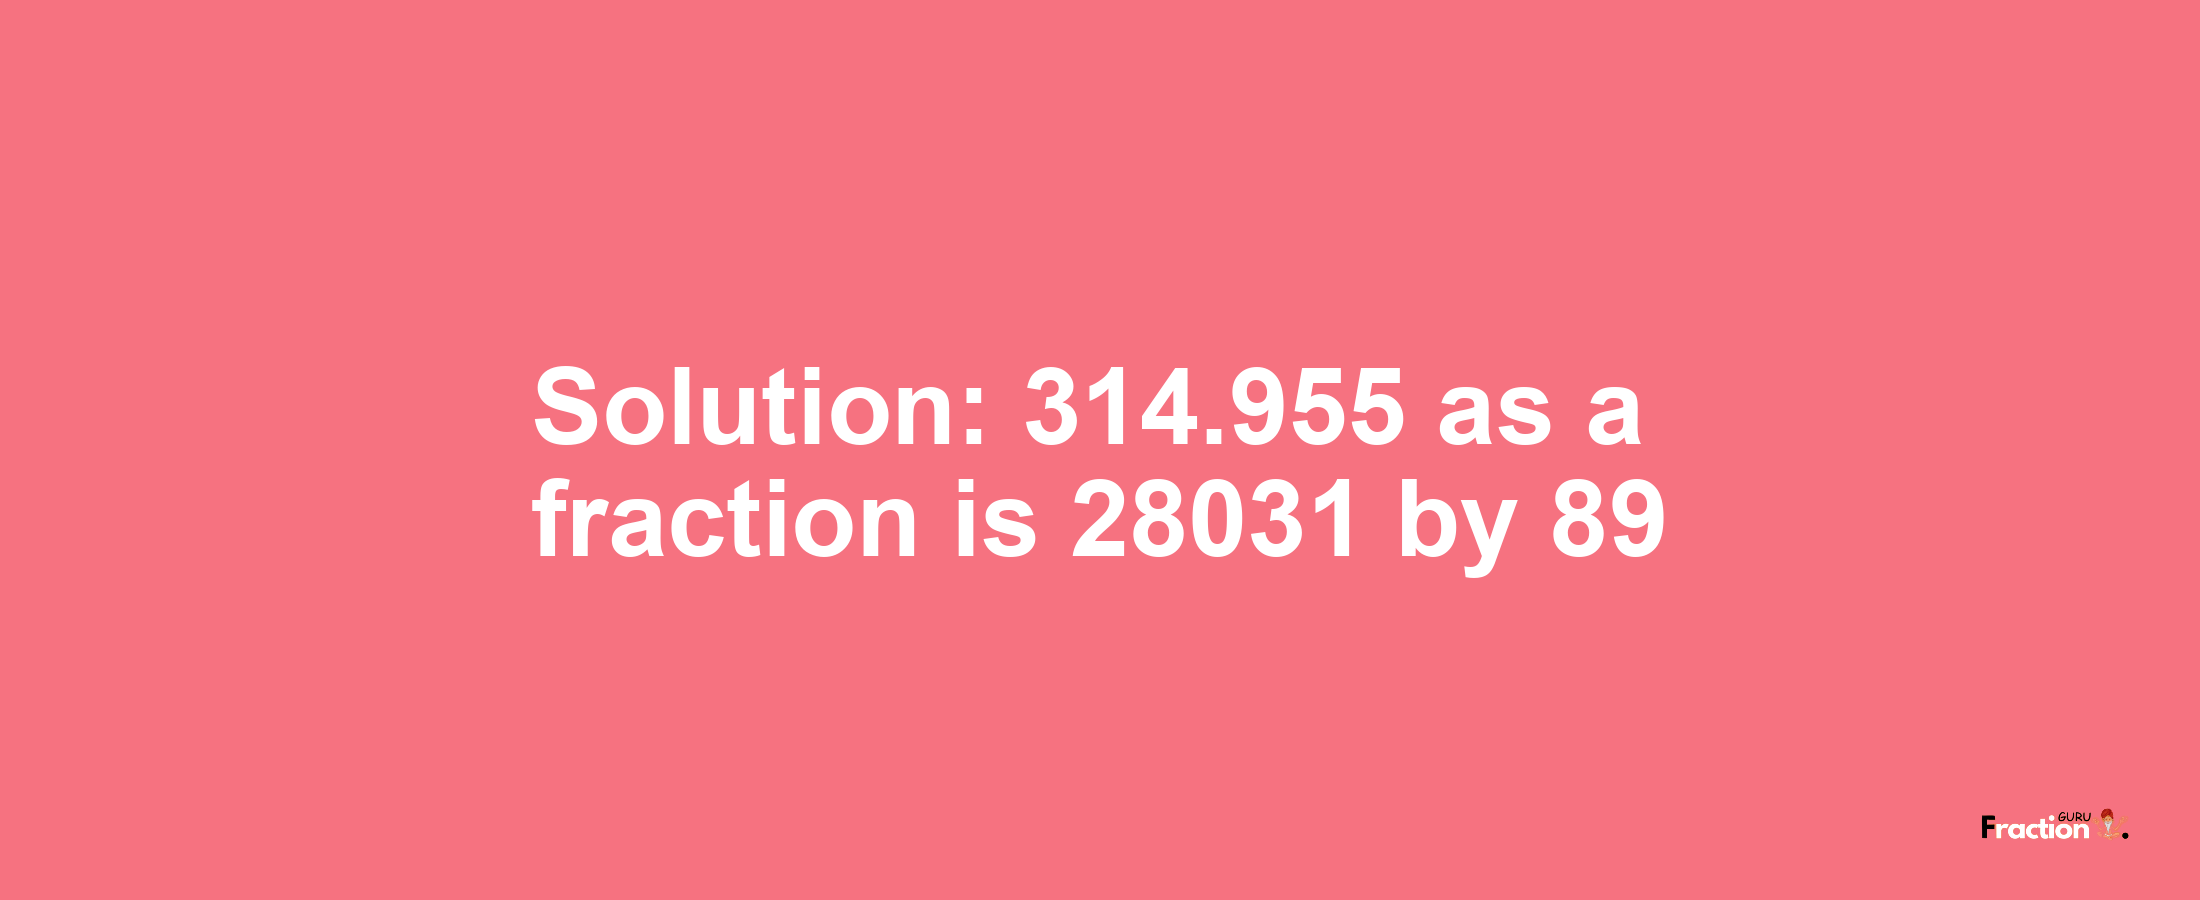 Solution:314.955 as a fraction is 28031/89